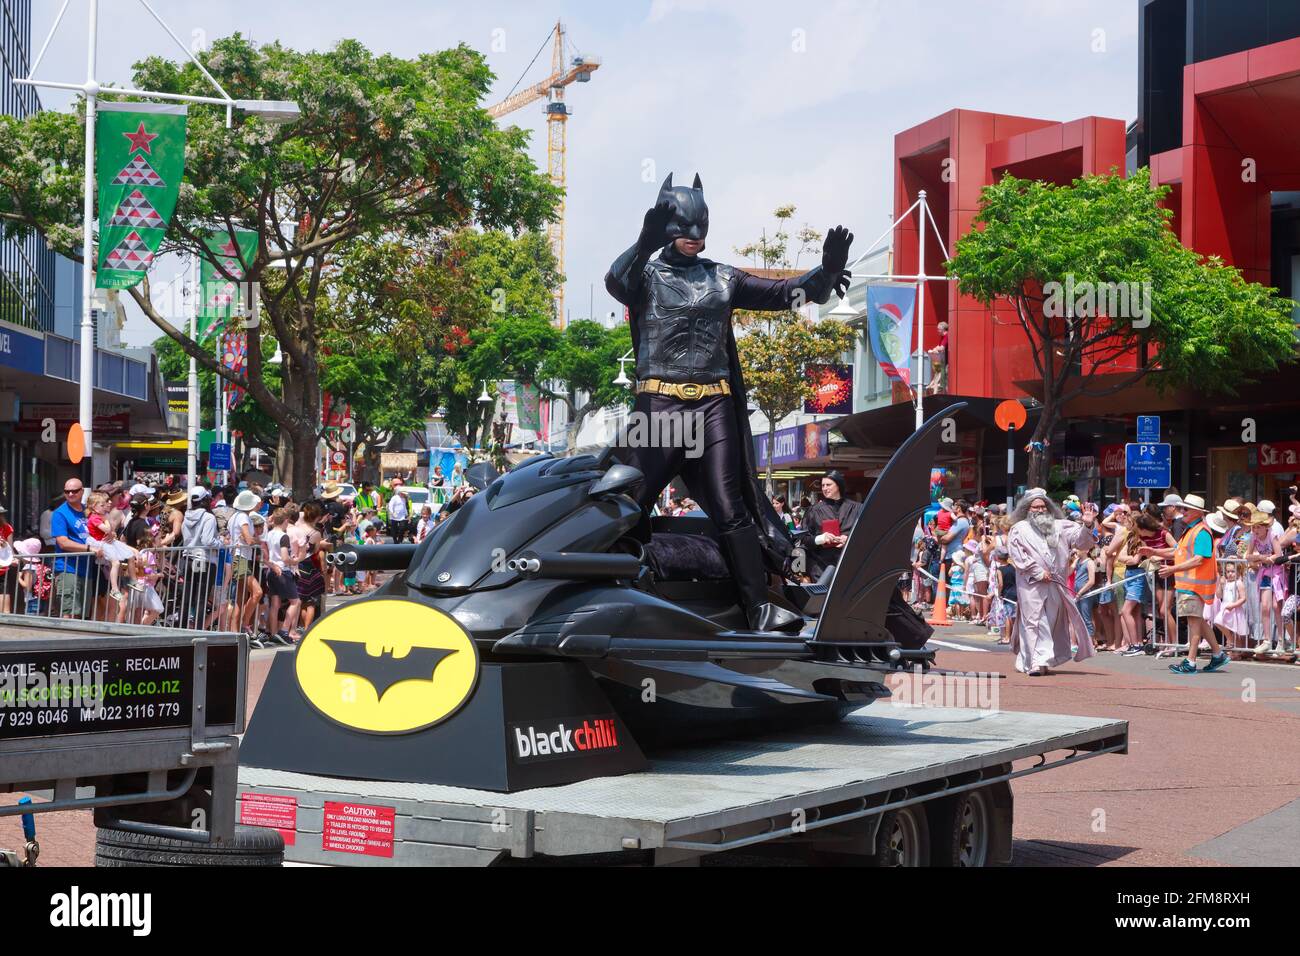 A man dressed as Batman on a 'Batmobile' themed jet ski entertaining the crowd at a Christmas parade in Tauranga, New Zealand Stock Photo